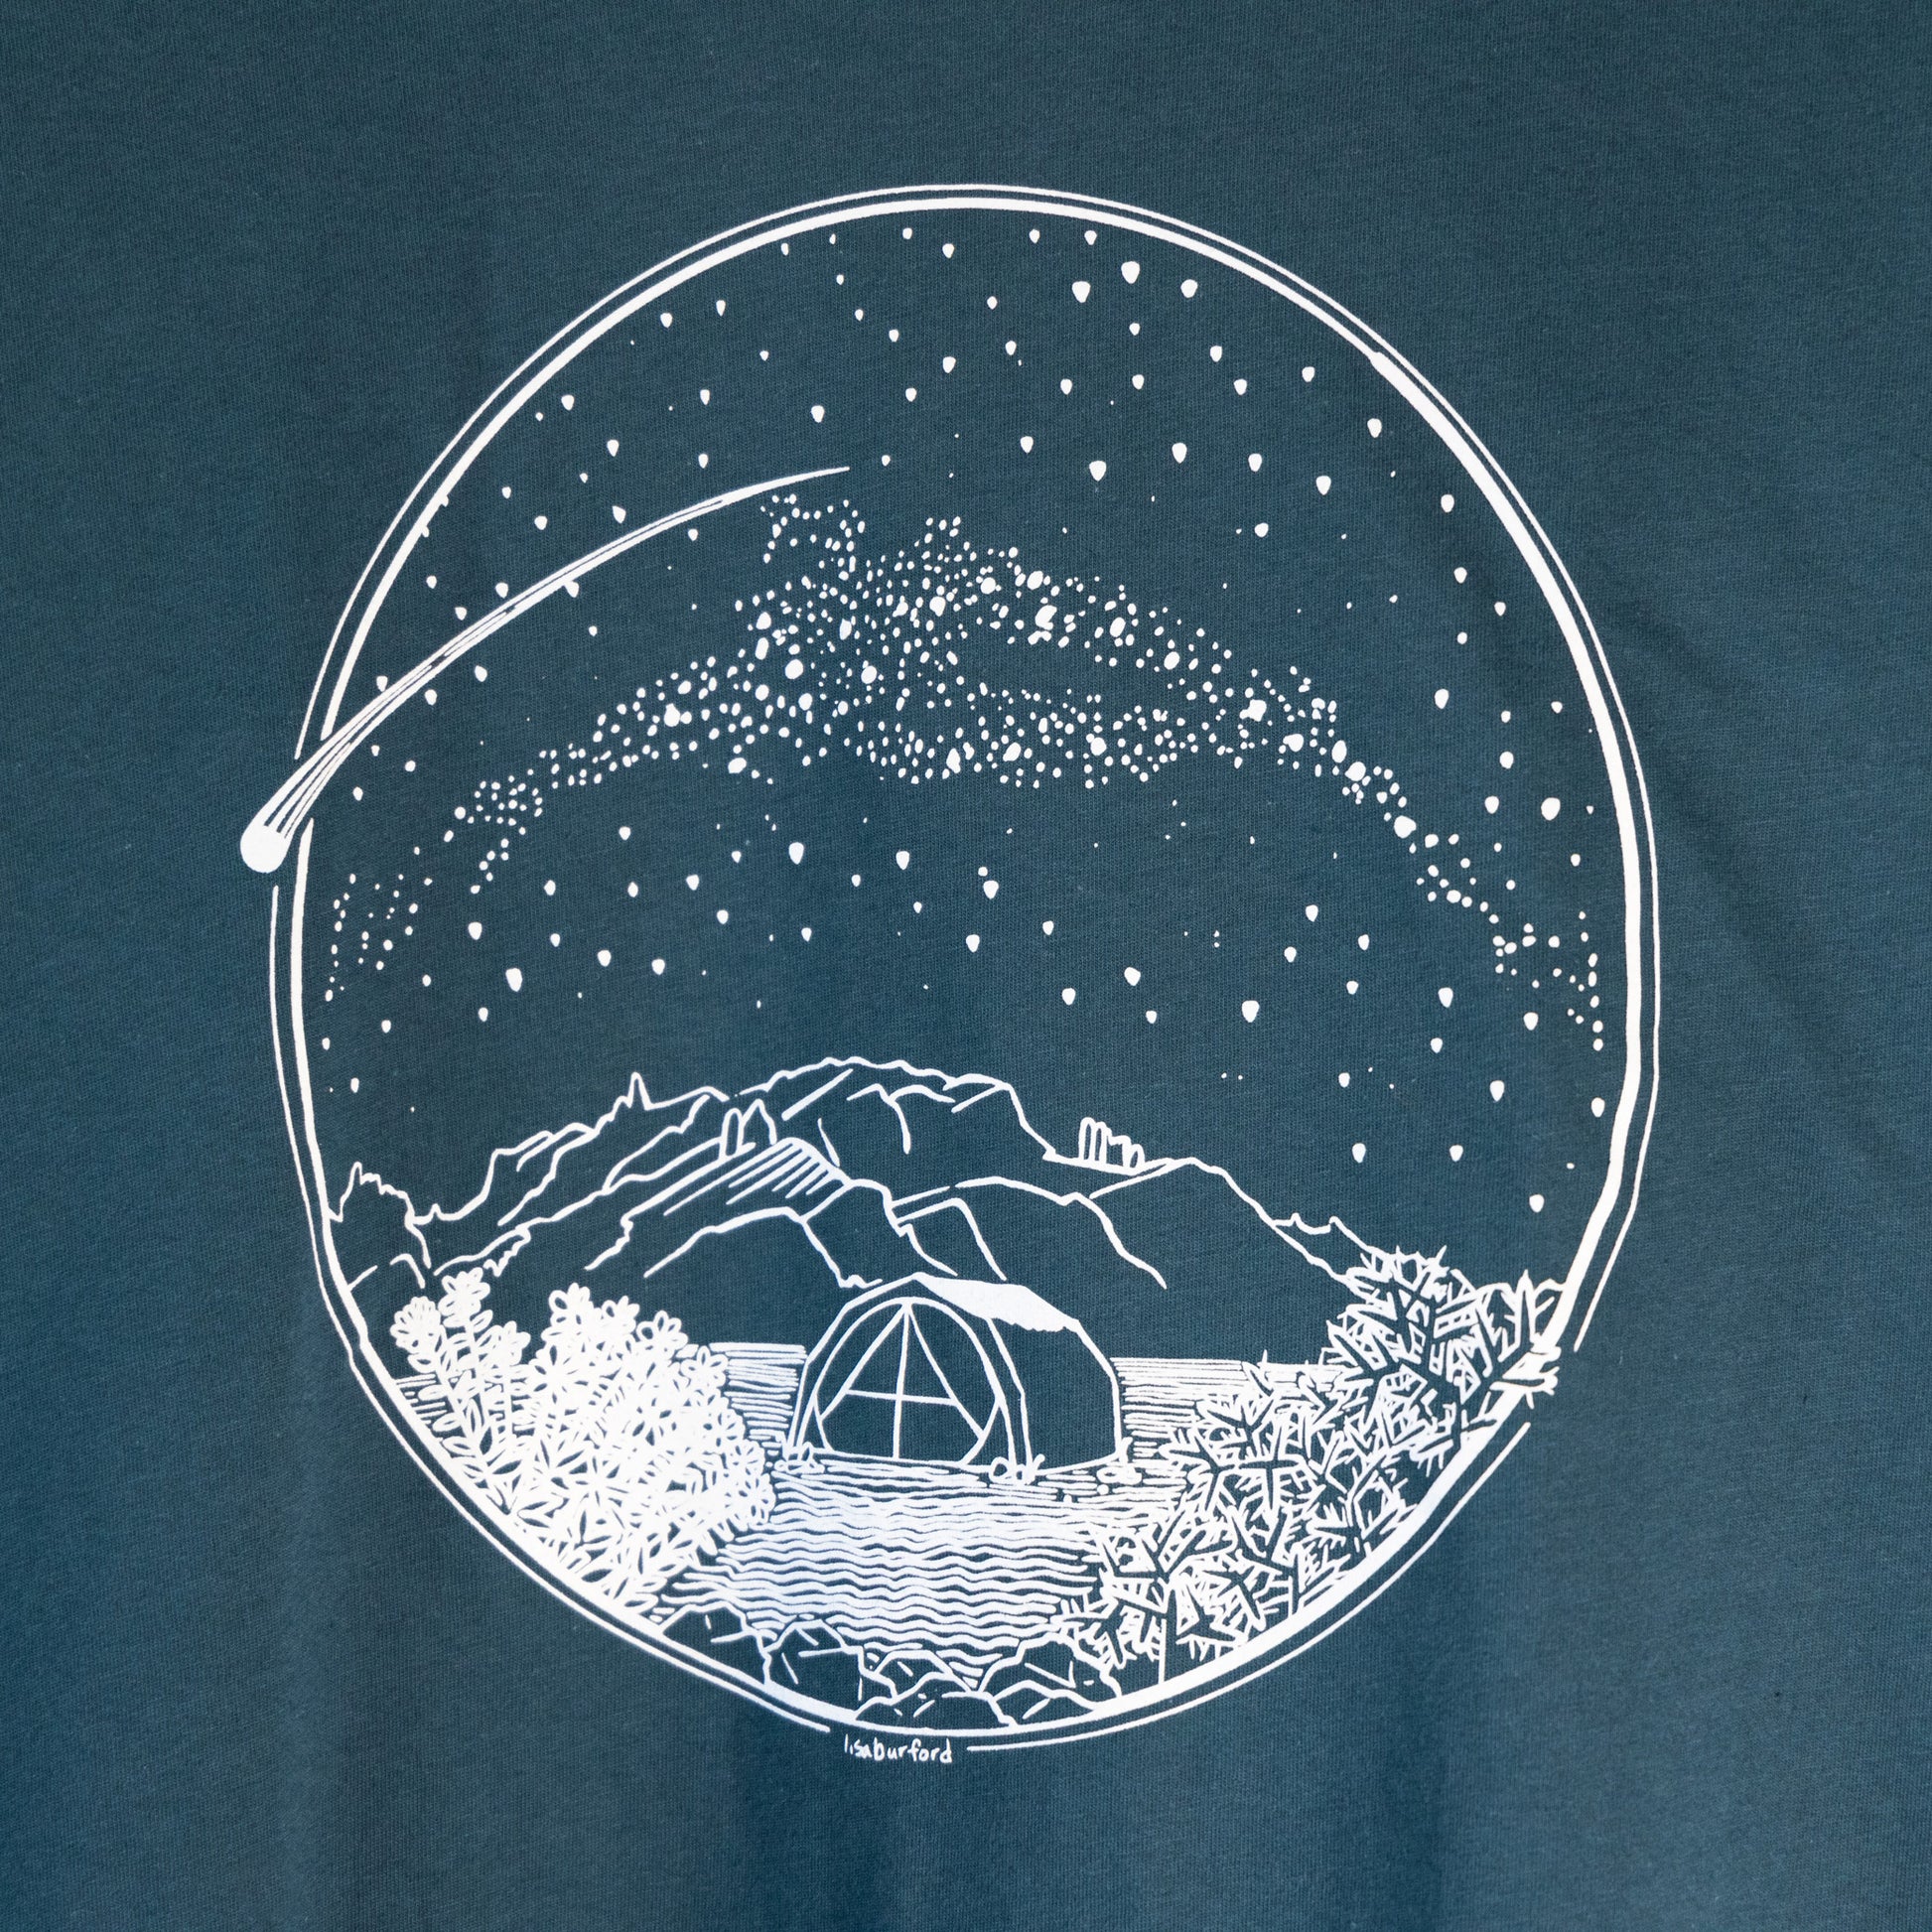 A close up of the design. A white Desert Camping illustration on the front of the gender neutral ocean blue colored t-shirt. The illustration shows a tent in the foreground with mountains in the background, desert plants in the very foreground, and stars, the Milky Way gallaxy, and a shooting star in the sky above the tent. The design is encompassed in a circular shape.